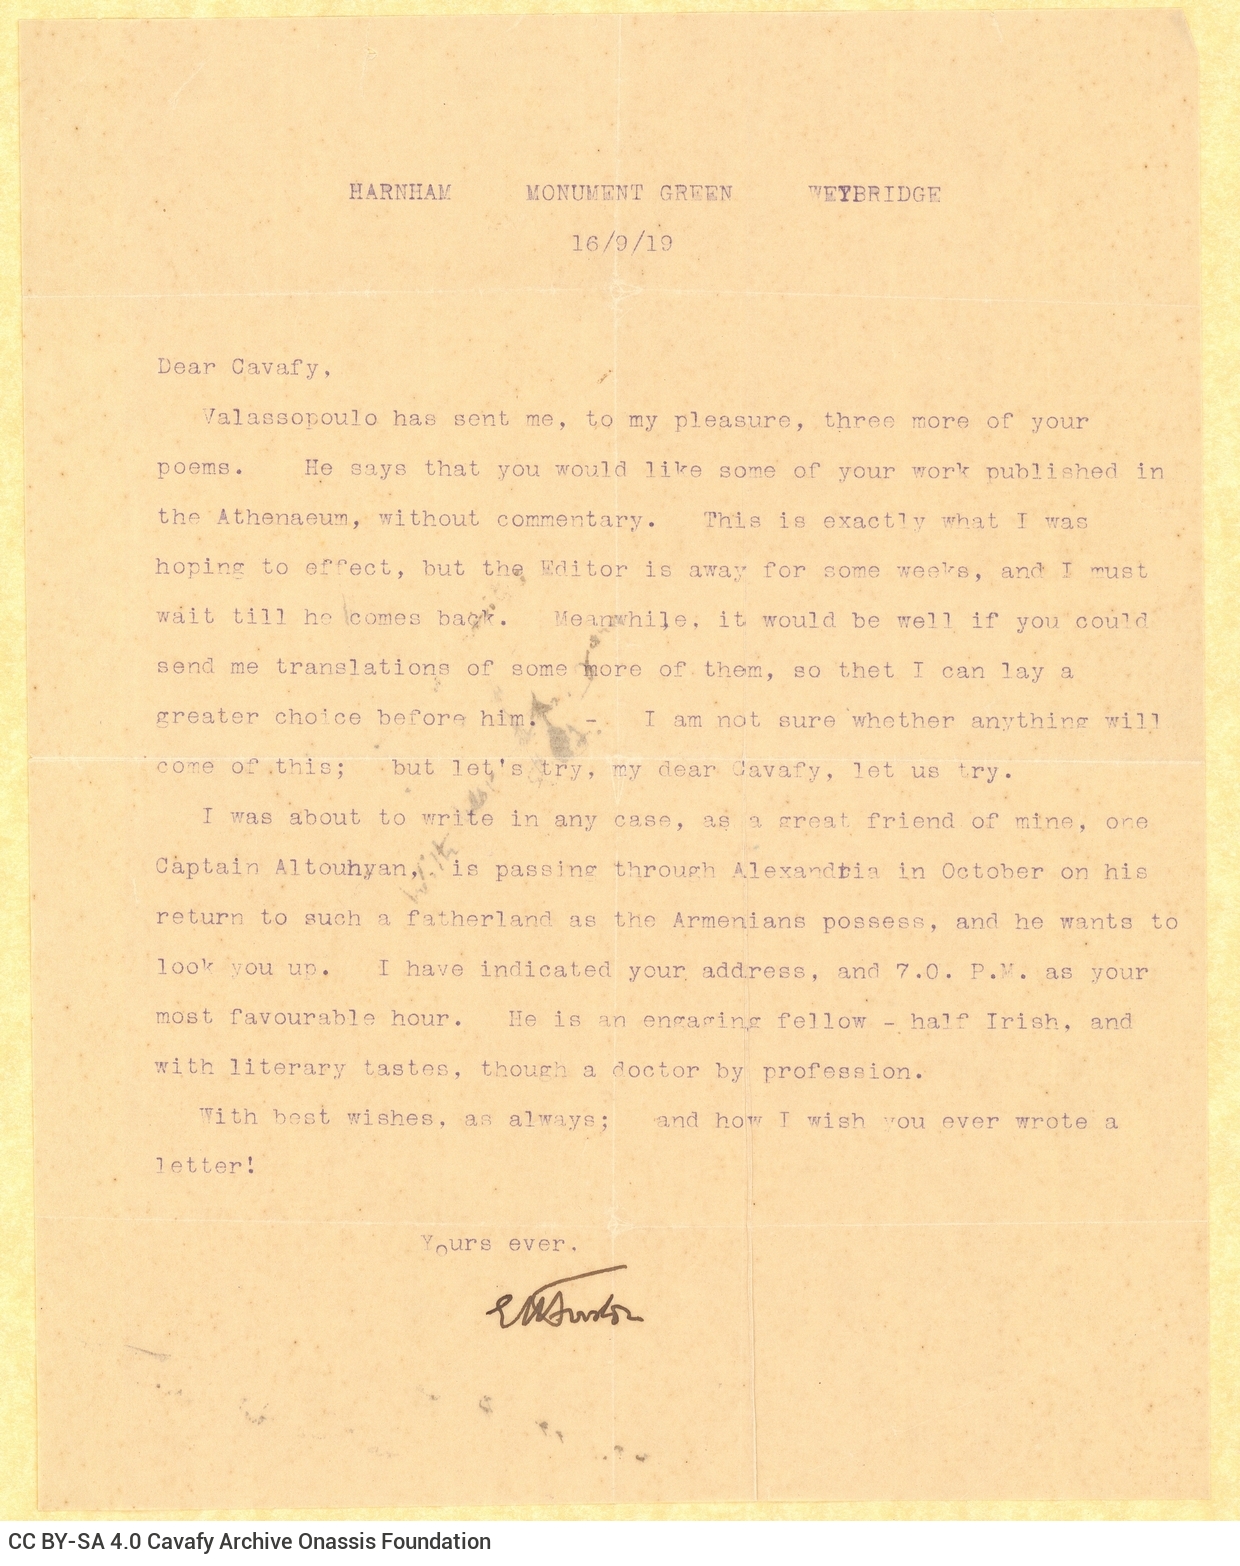 Typewritten letter by E. M. Forster on one side of a sheet. It pertains to English translations of Cavafy's poems to be publi